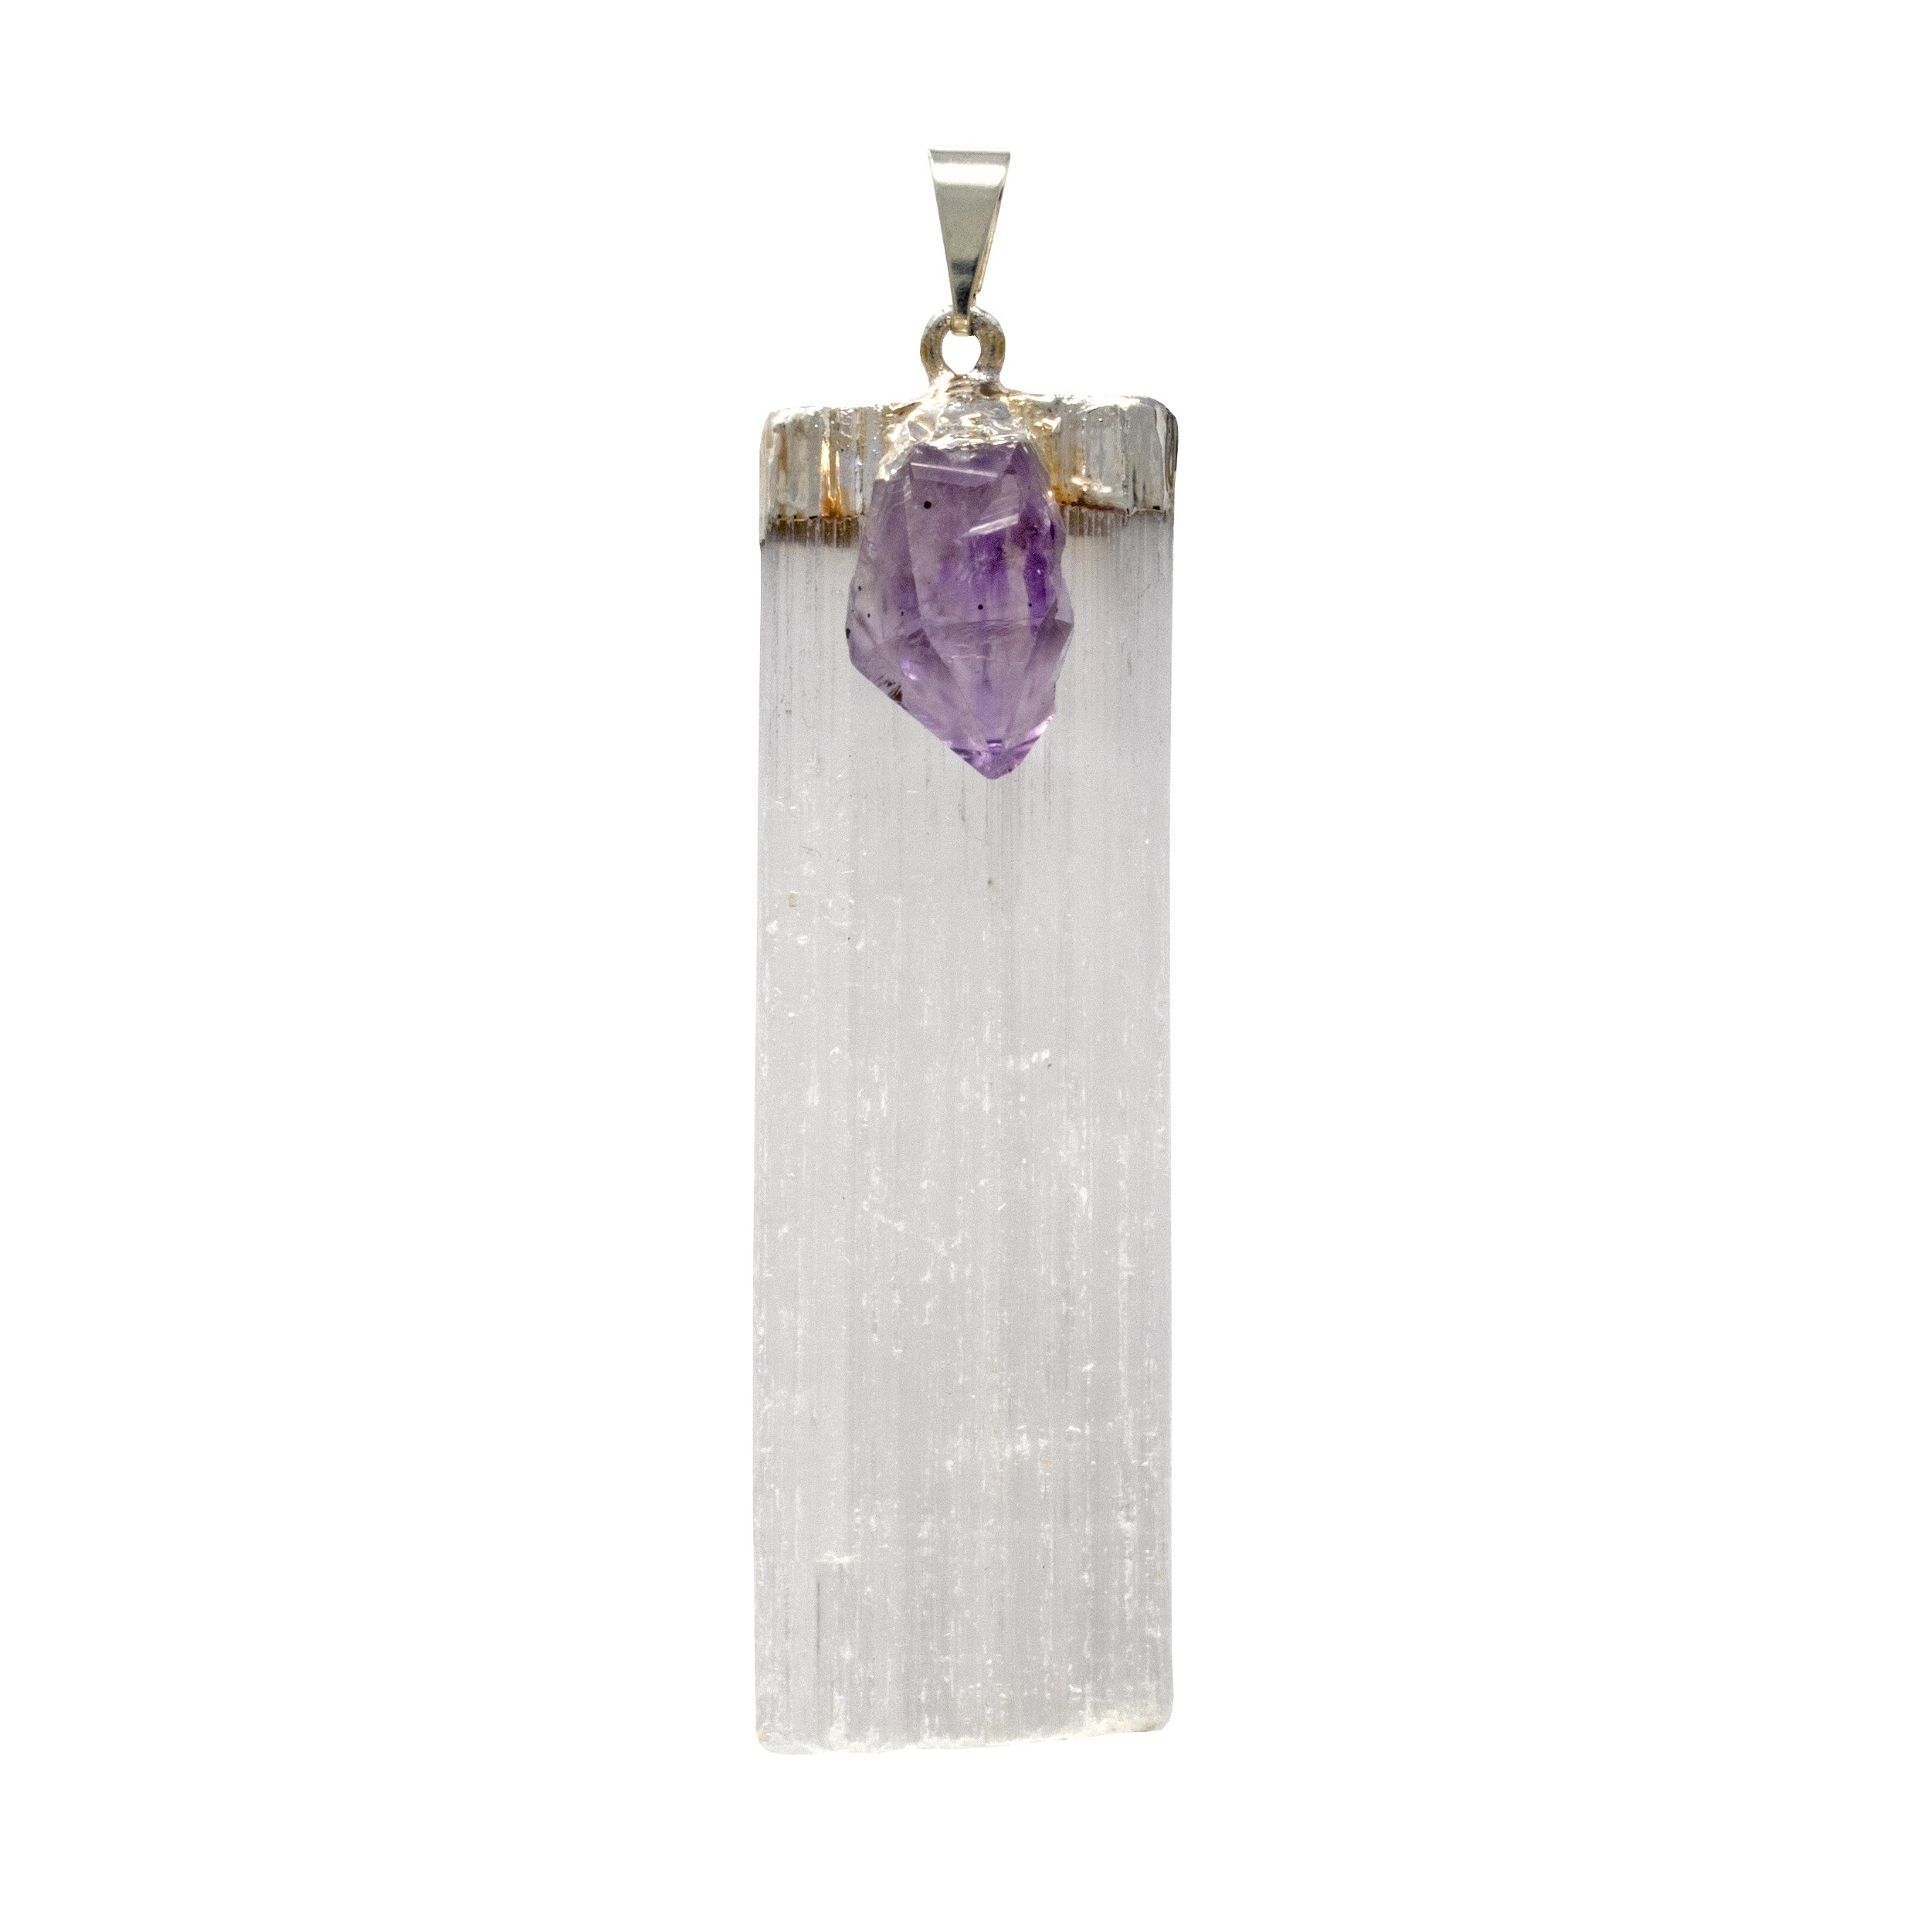 Selenite Blade Pendant With Amethyst Crystal (Selenite from Morocco)